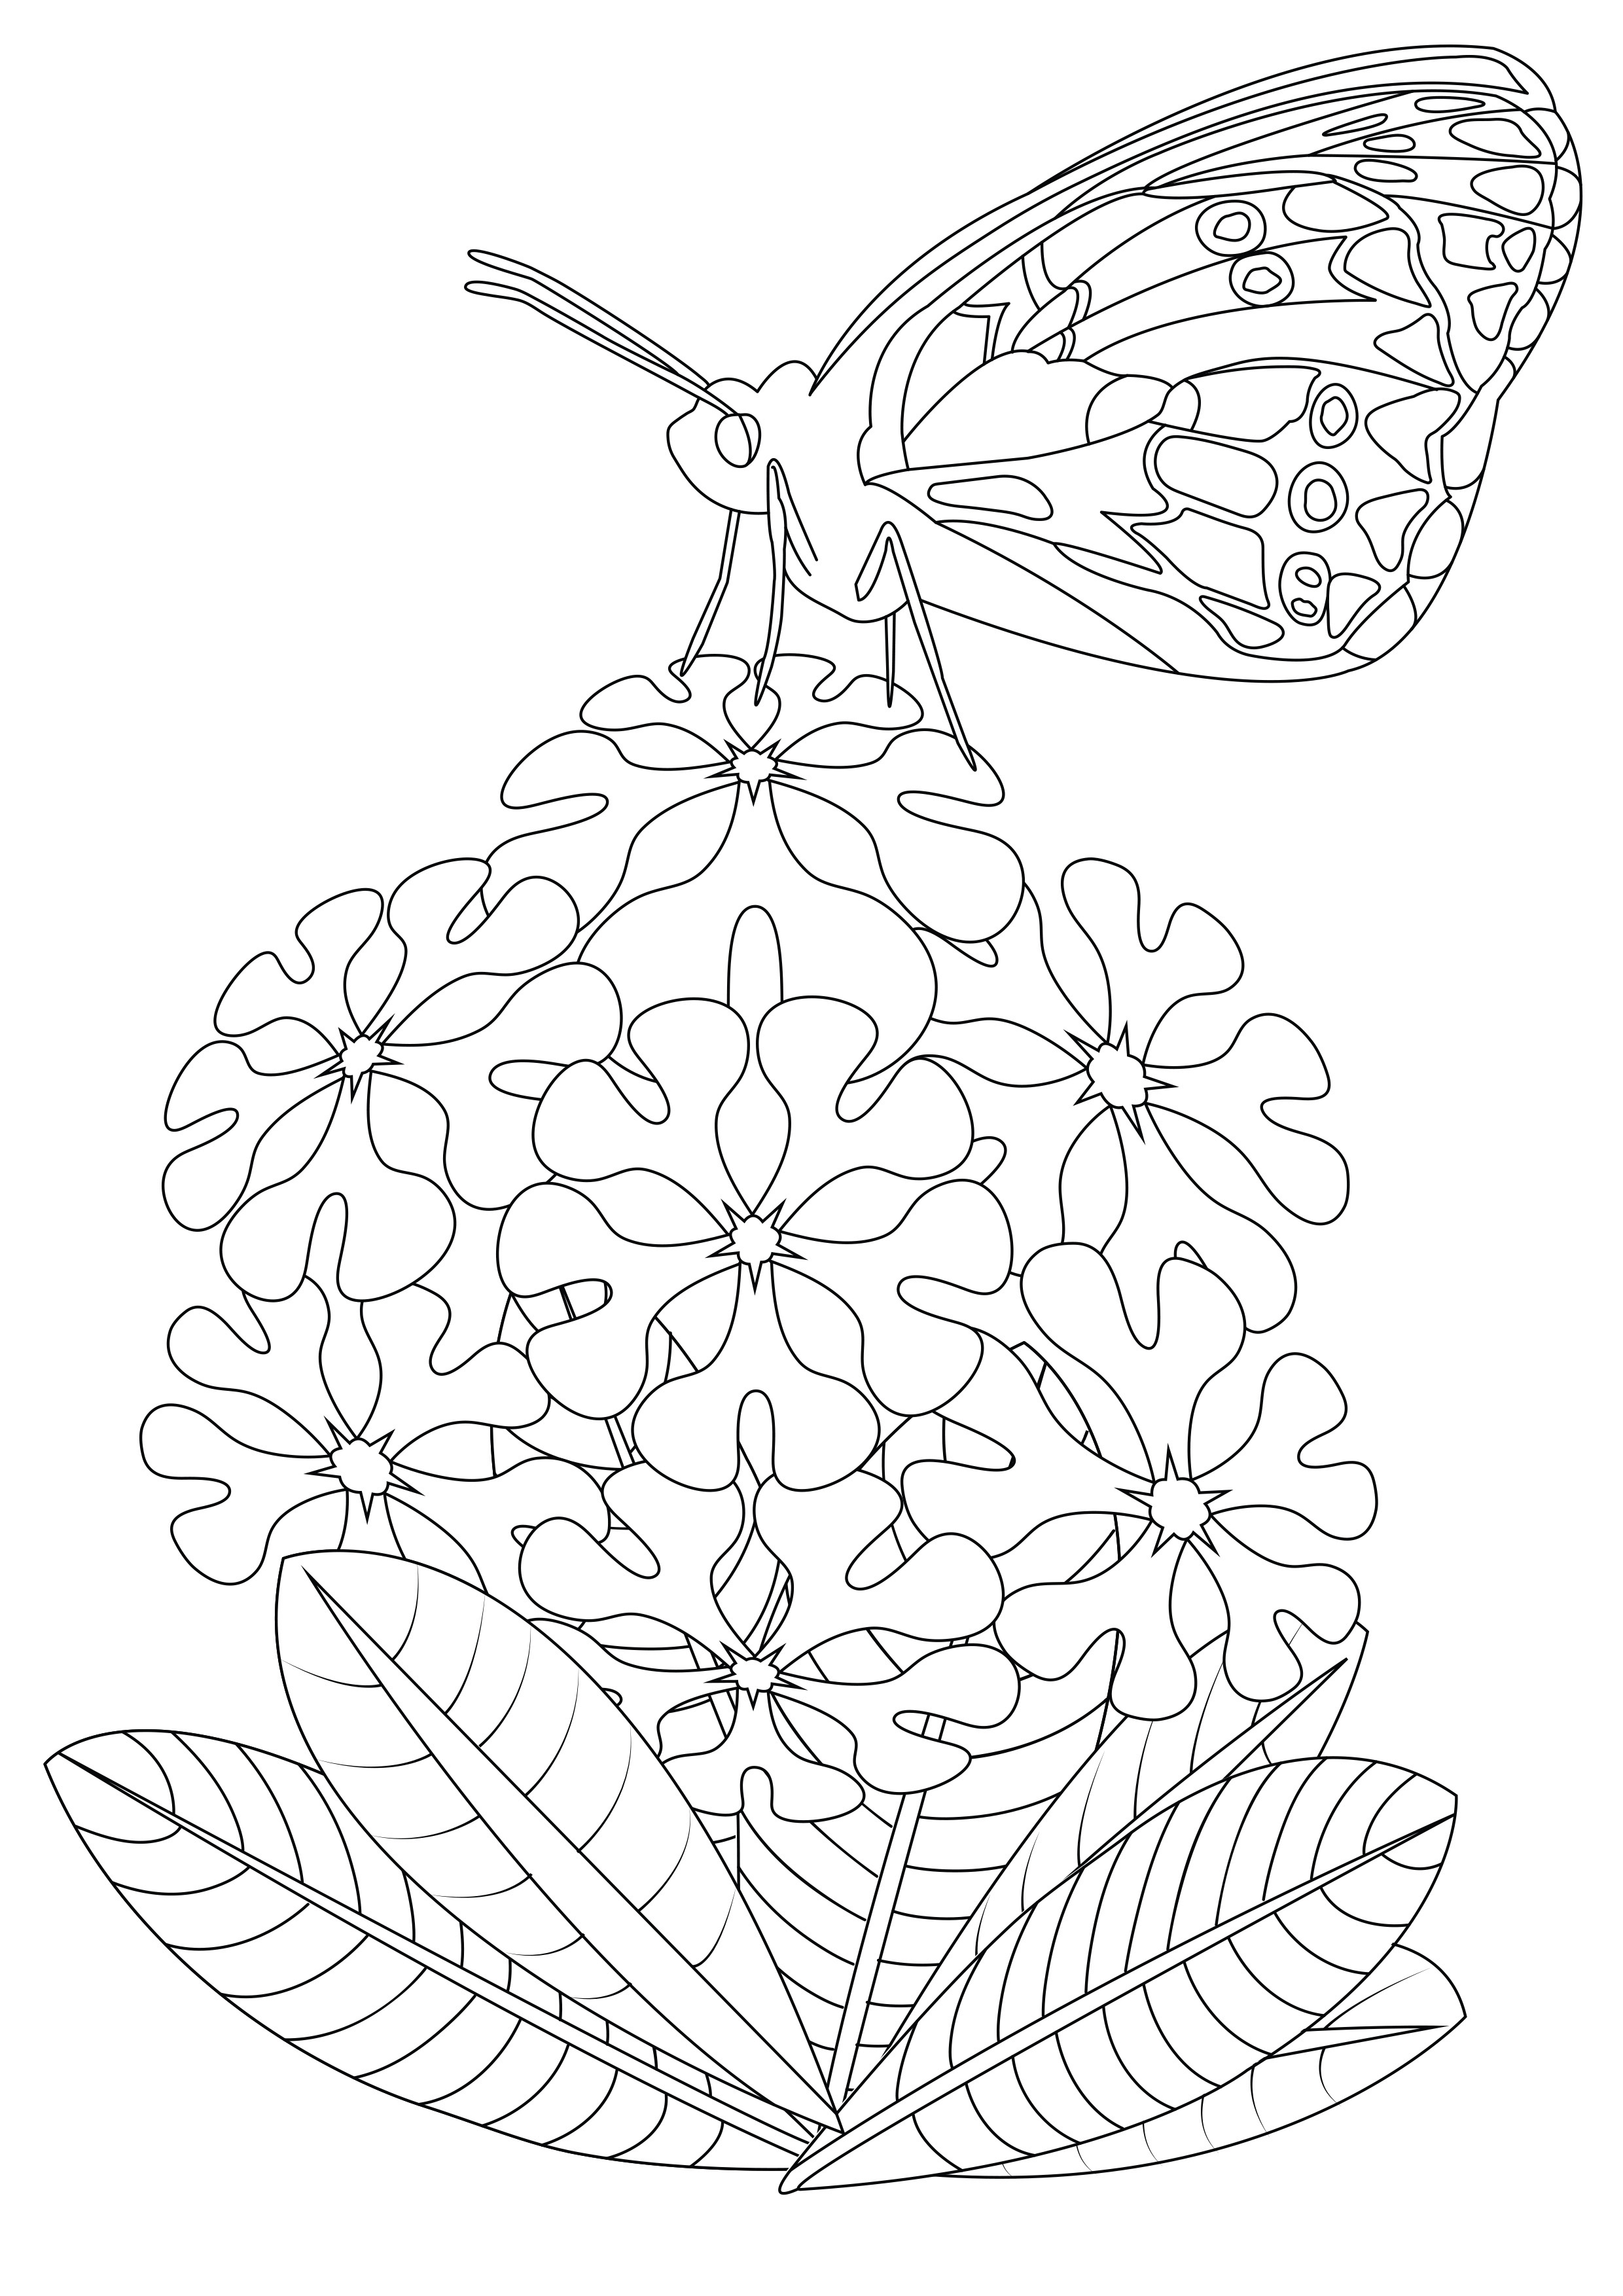 Butterfly on flowers 2 - Butterflies & insects Adult Coloring Pages